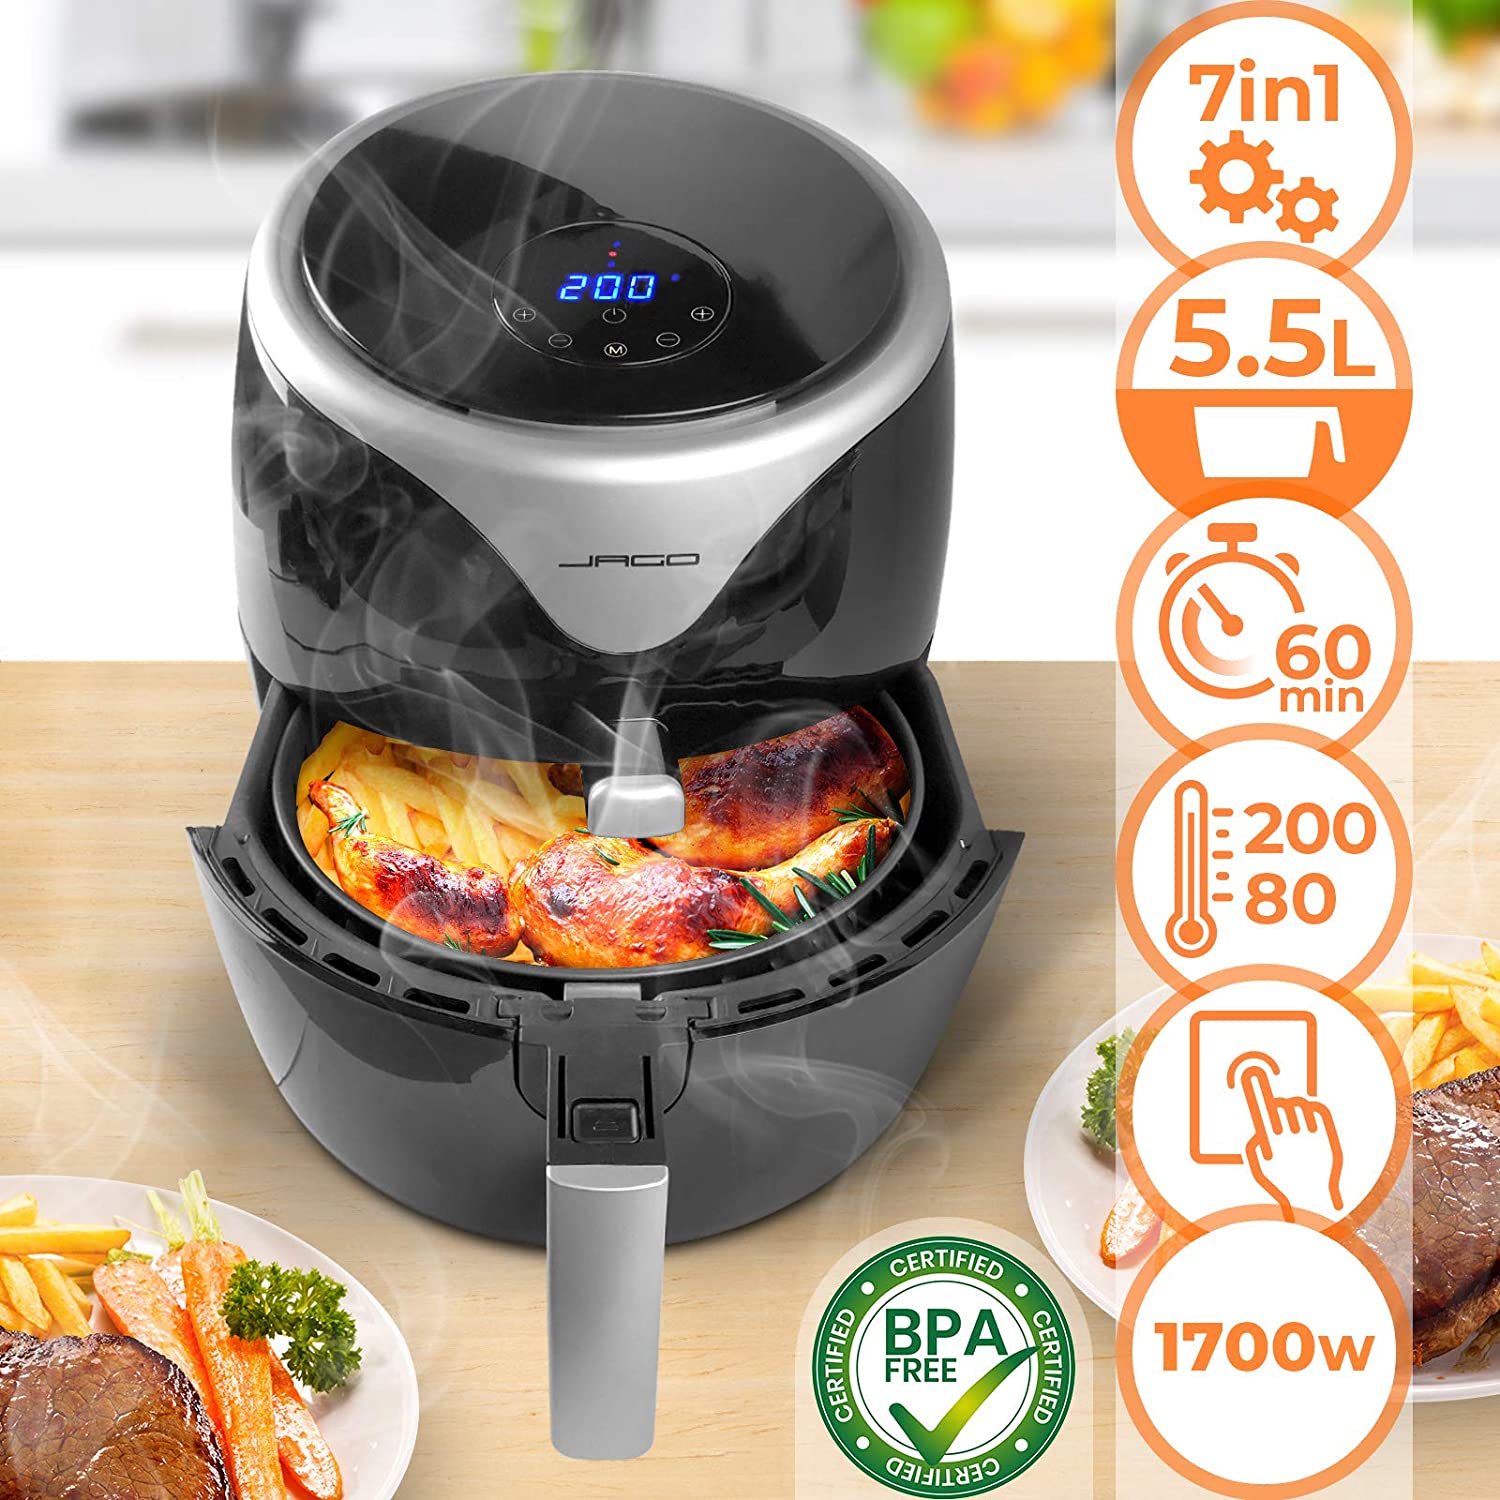 painter to punish dance Friteuza cu aer cald, Airfryer Deluxe, 5,5litri, Led touch screen +7  programe,Jago - eMAG.ro